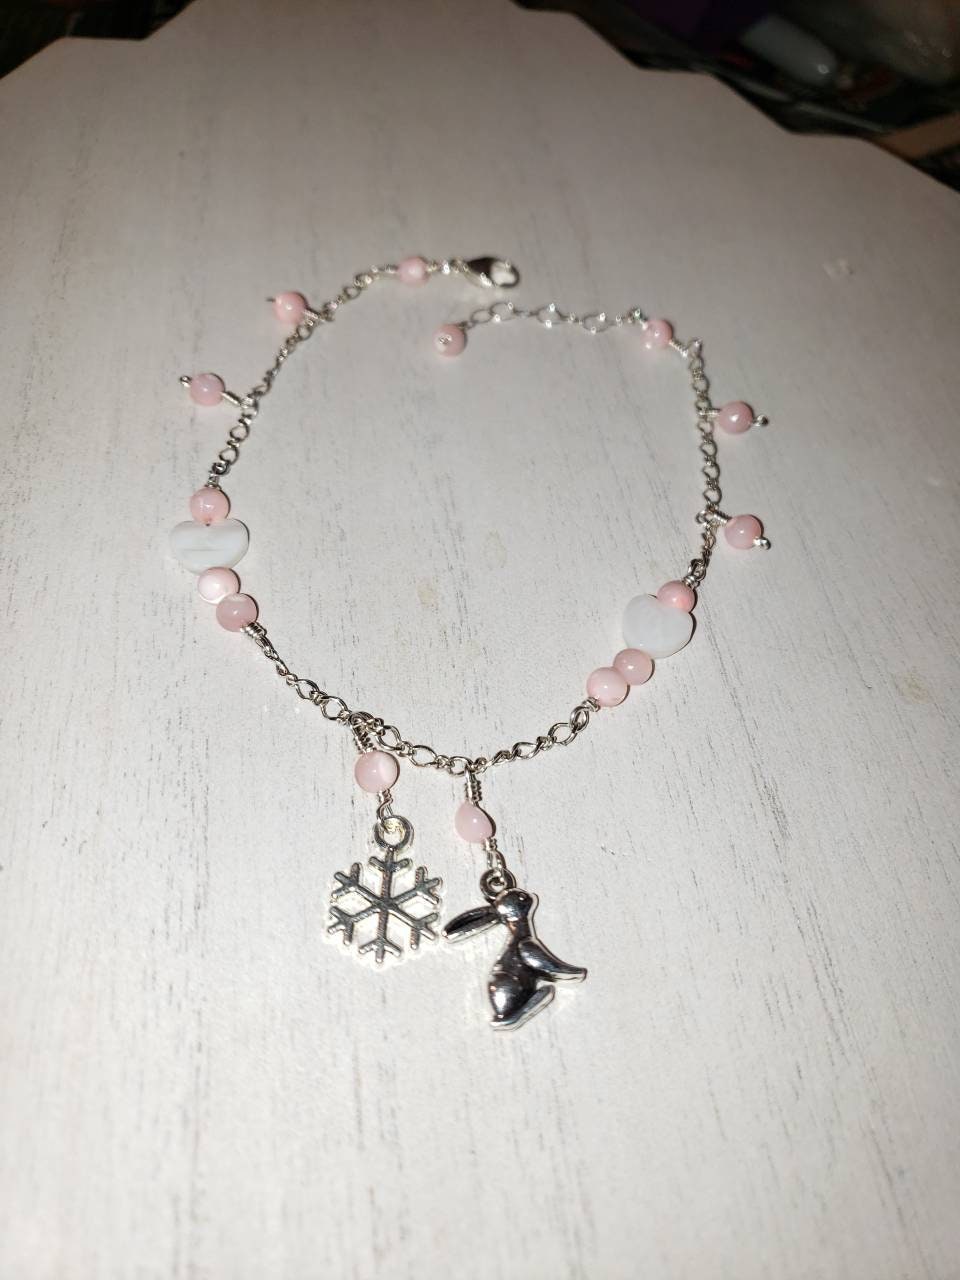 Snow Bunny Anklet, BBC, Queen of Spades Initial Jewelry, Personalized Jewelry, Sexy Anklets, Swinger Jewelry, Kinky,